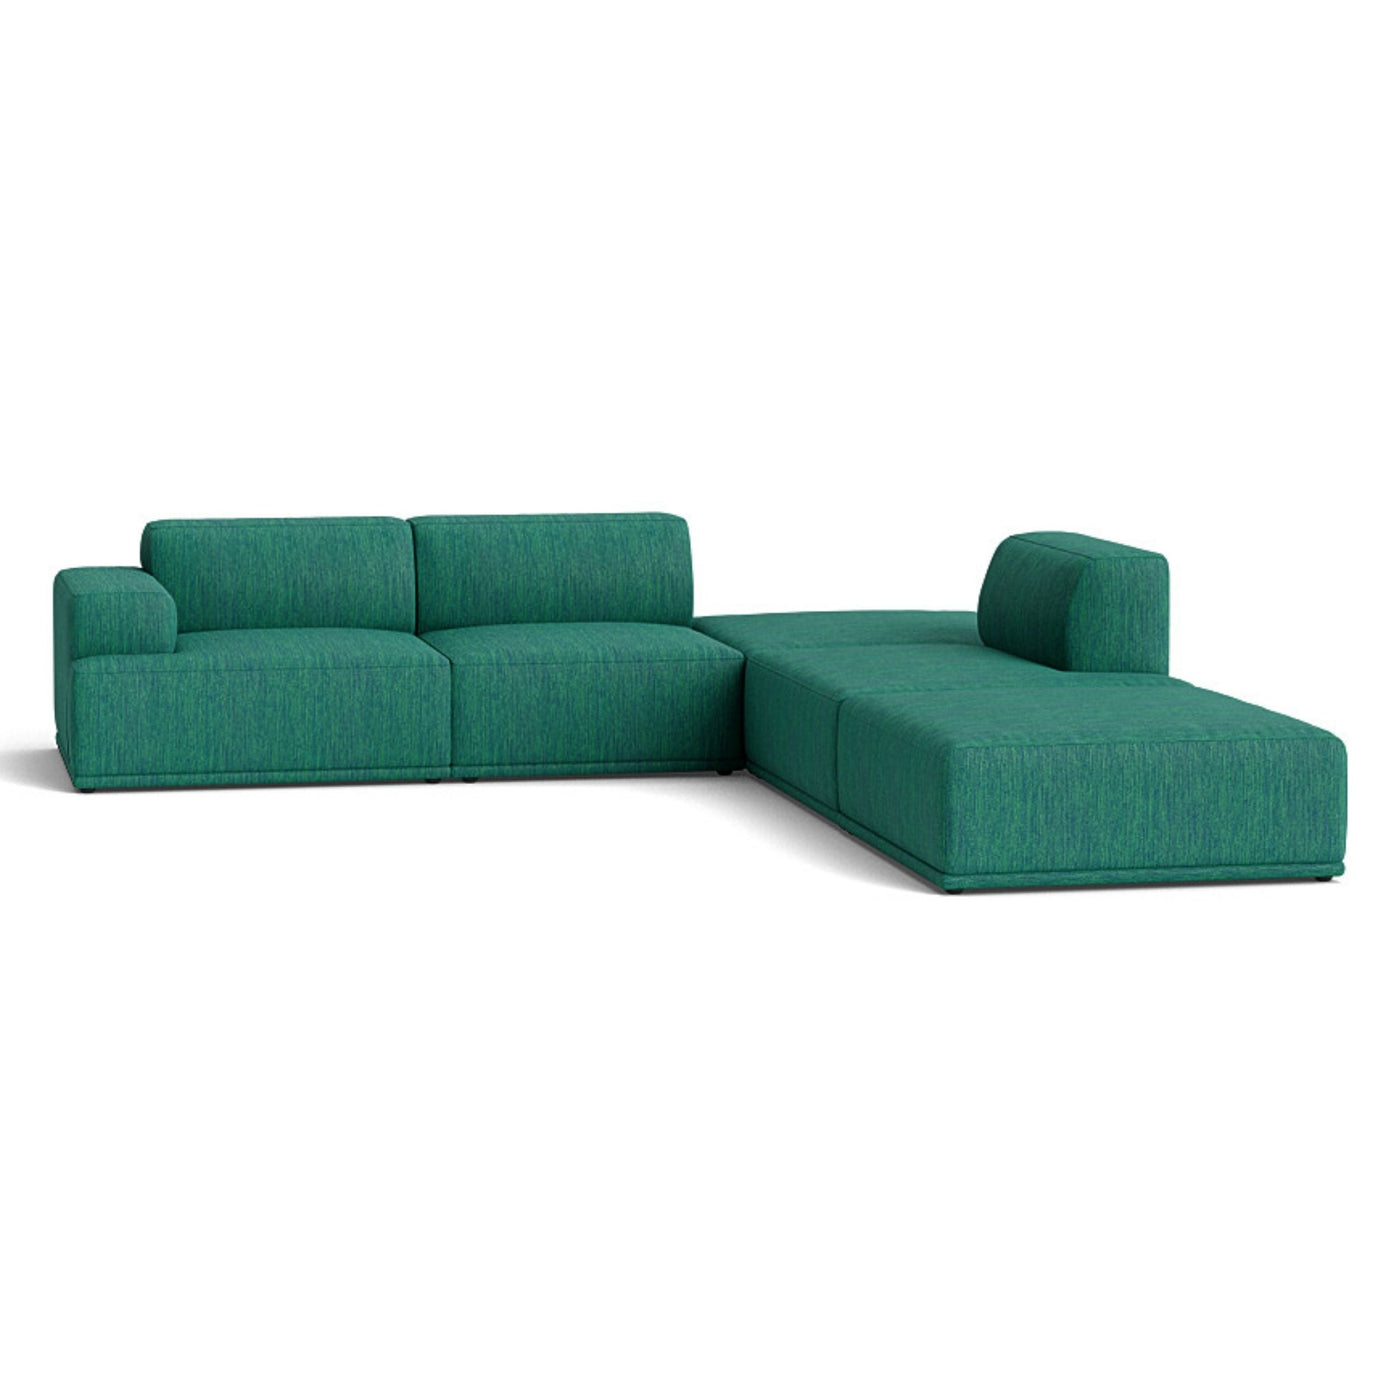 Muuto Connect Soft Modular Corner Sofa, configuration 3.  Made-to-order from someday designs. #colour_balder-862